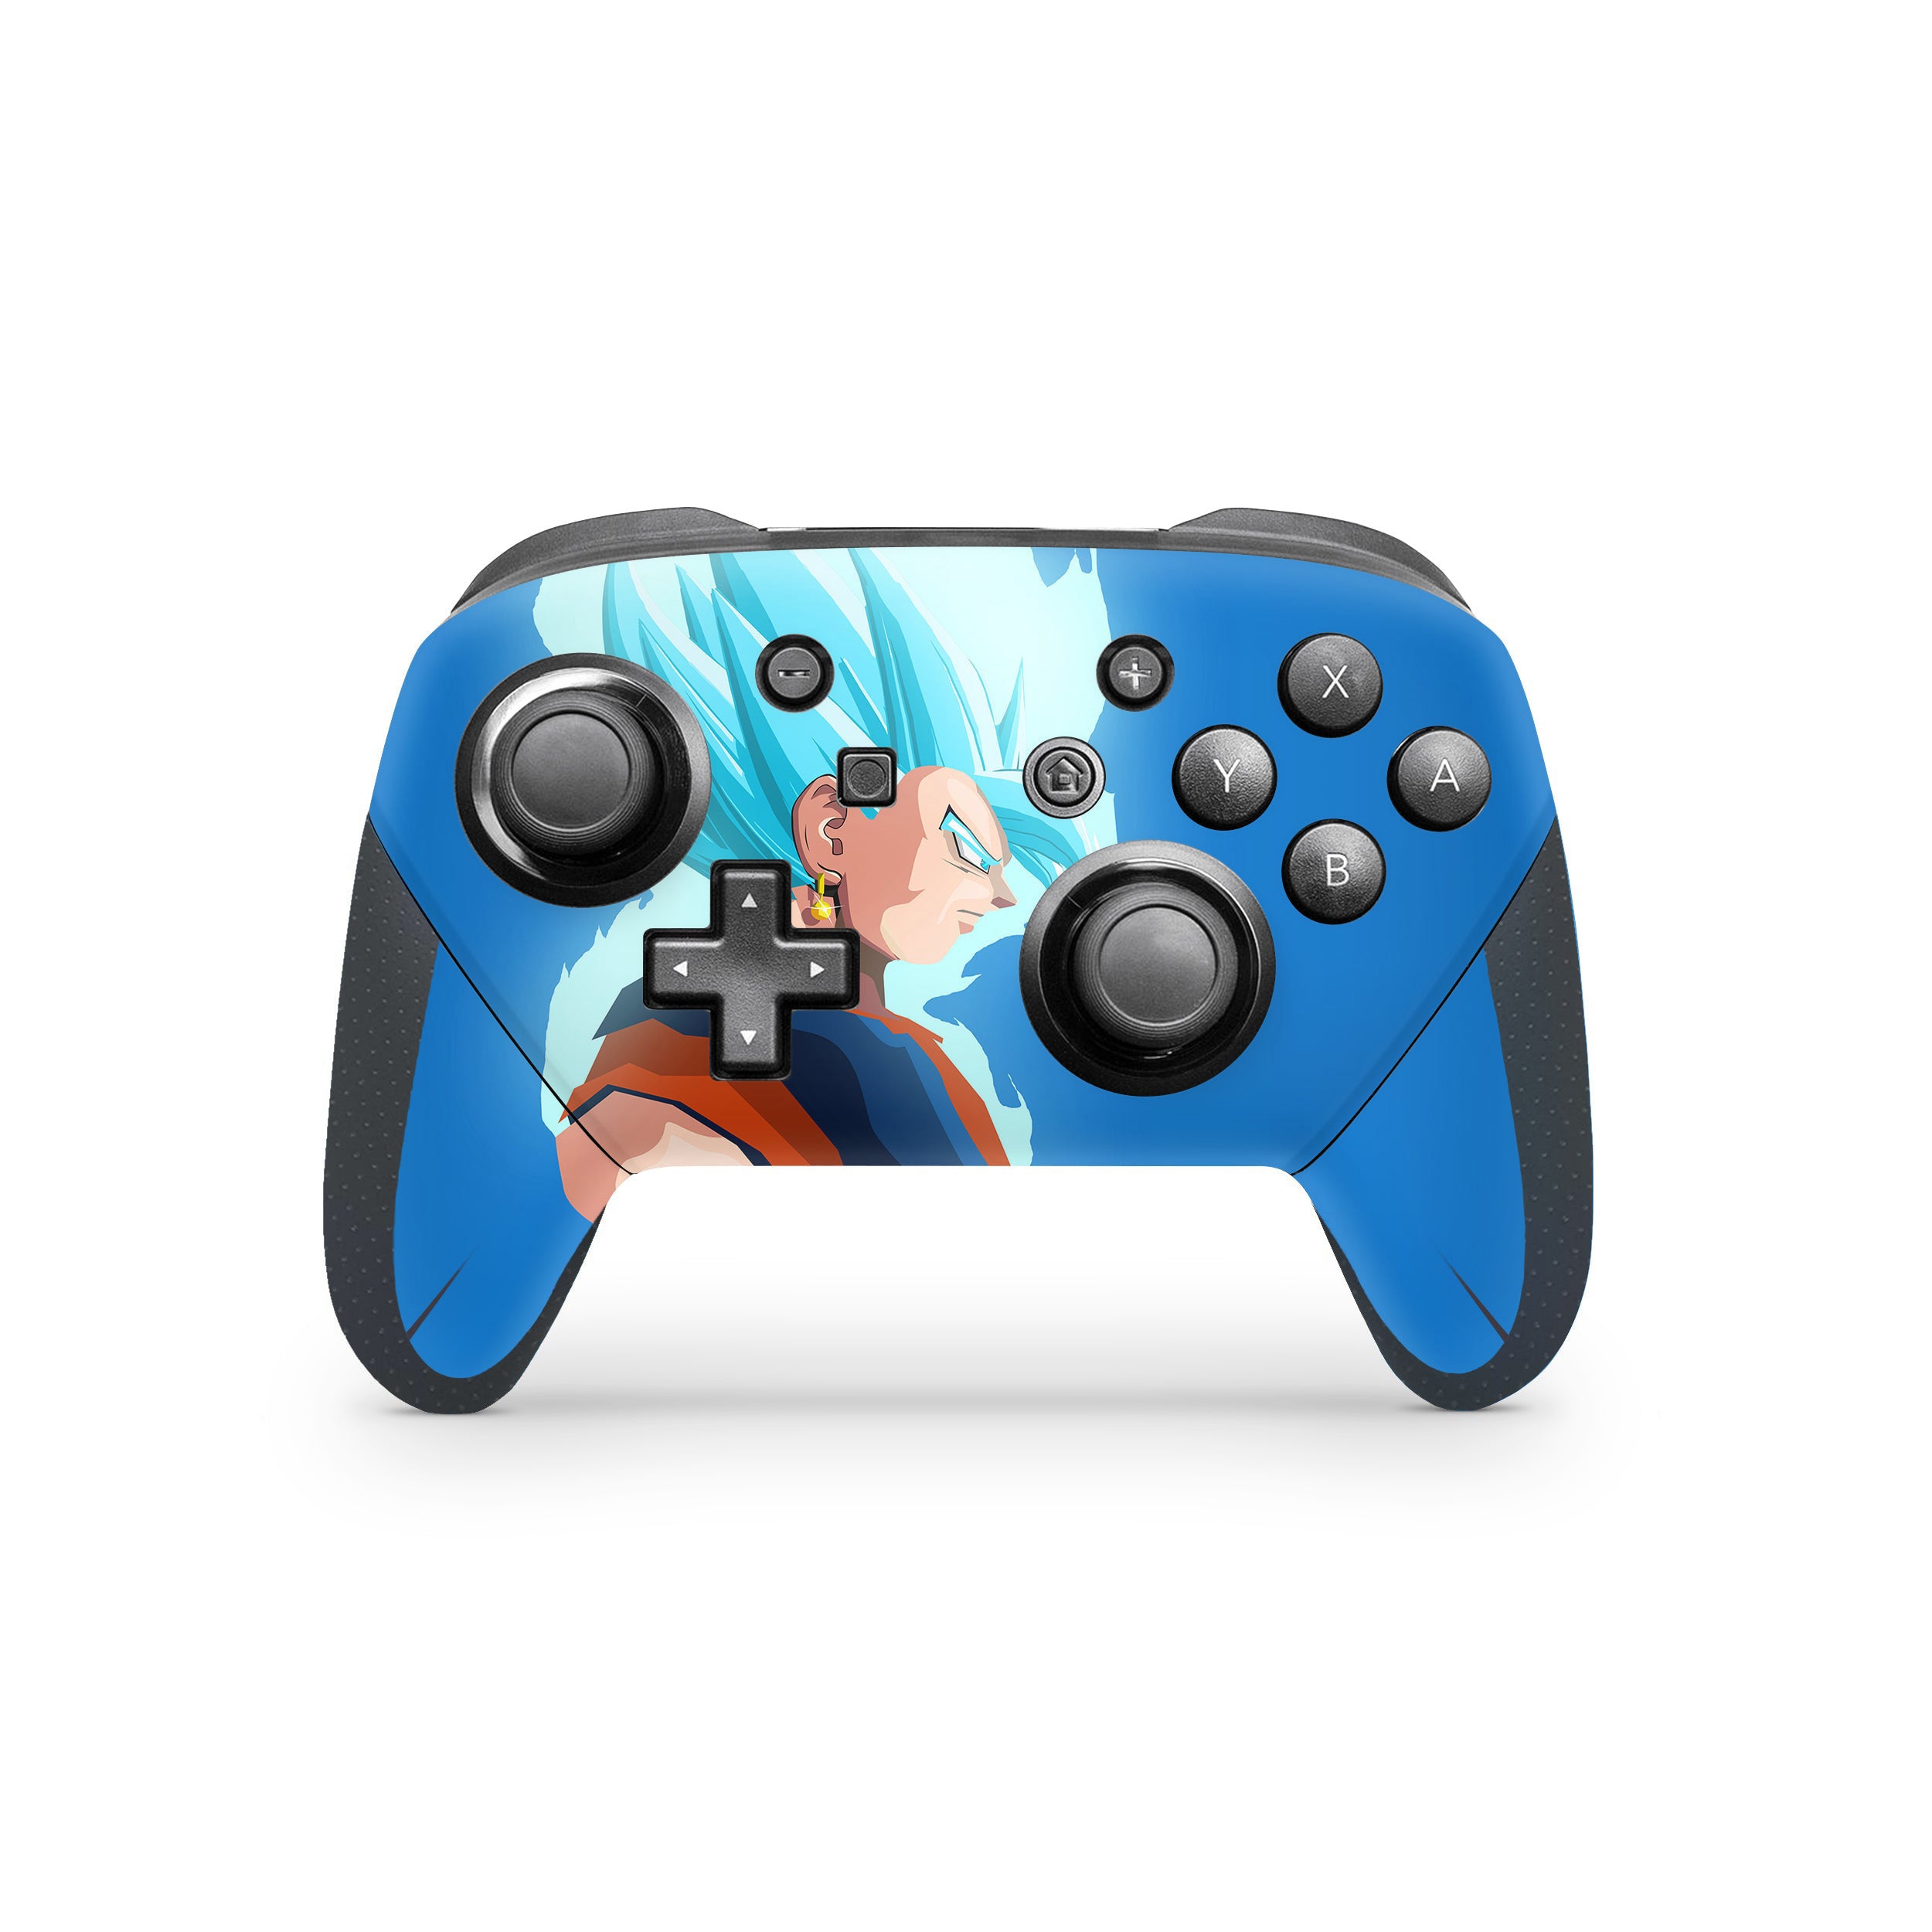 A video game skin featuring a Dragon Ball Super Vegito design for the Switch Pro Controller.